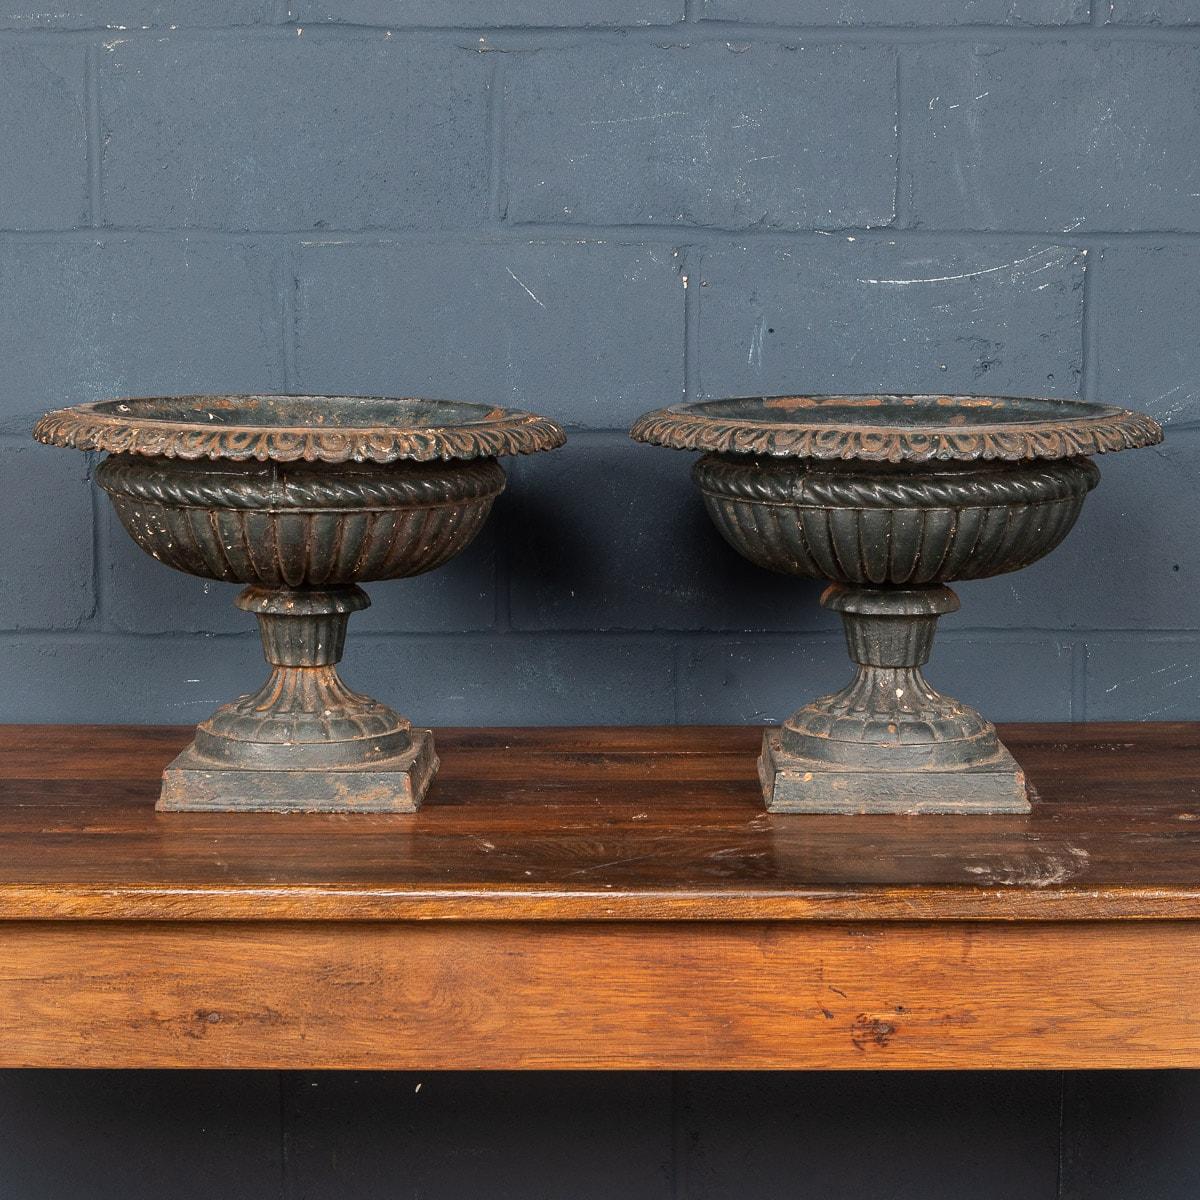 A large pair of late Victorian English cast iron garden urns dating to the latter part of the 19th century. Of neoclassical shape, they are in lovely condition, repainted over the years which merely adds their character and charm. 

CONDITION
In